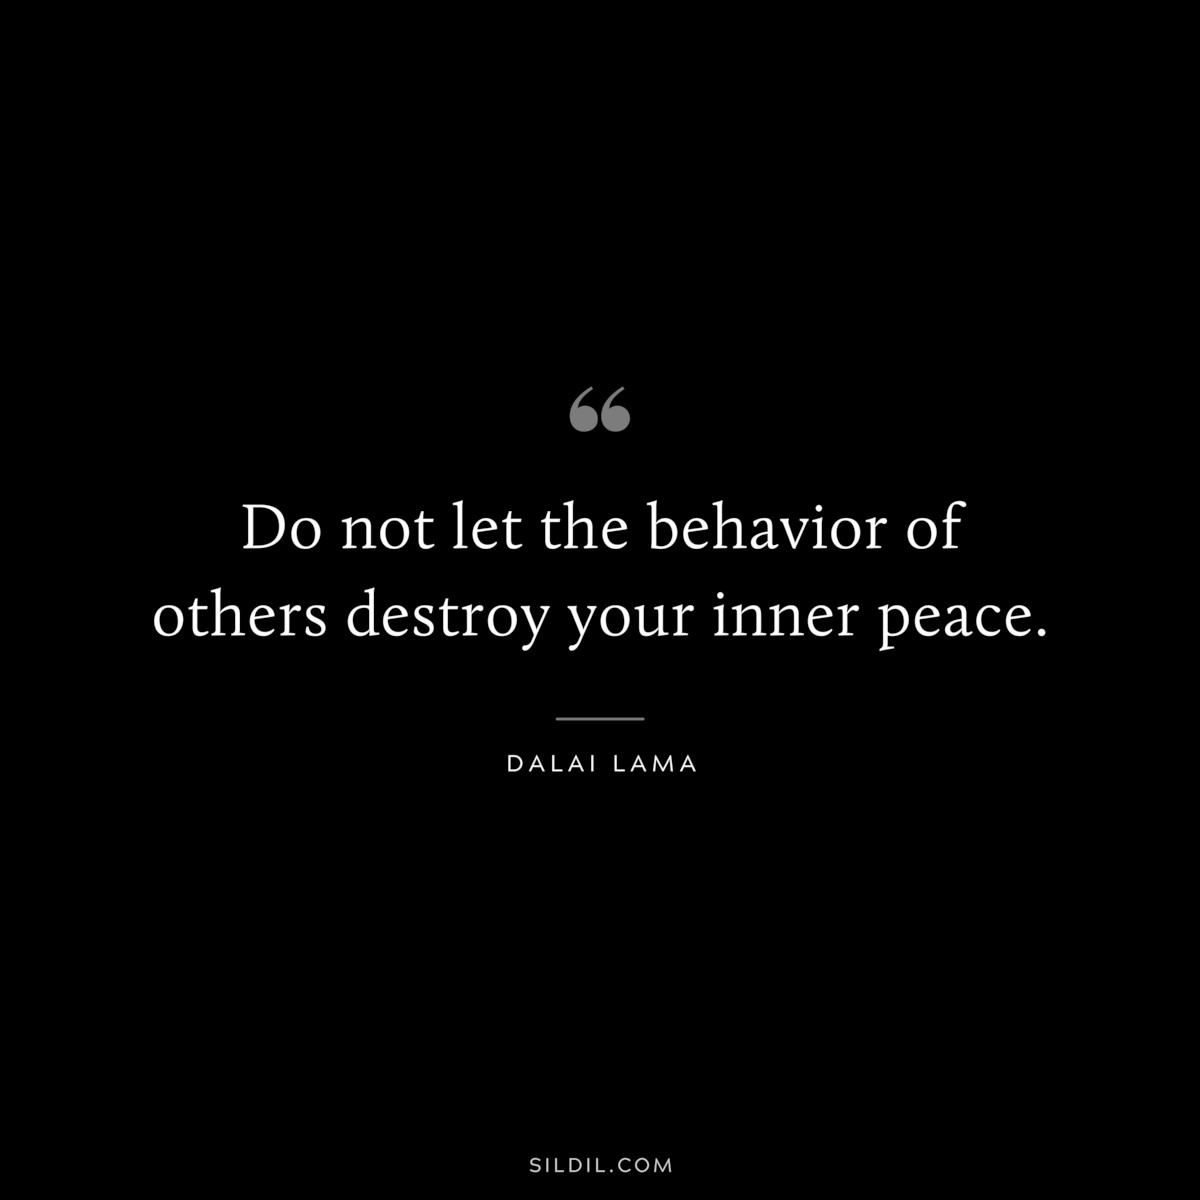 Do not let the behavior of others destroy your inner peace. ― Dalai Lama